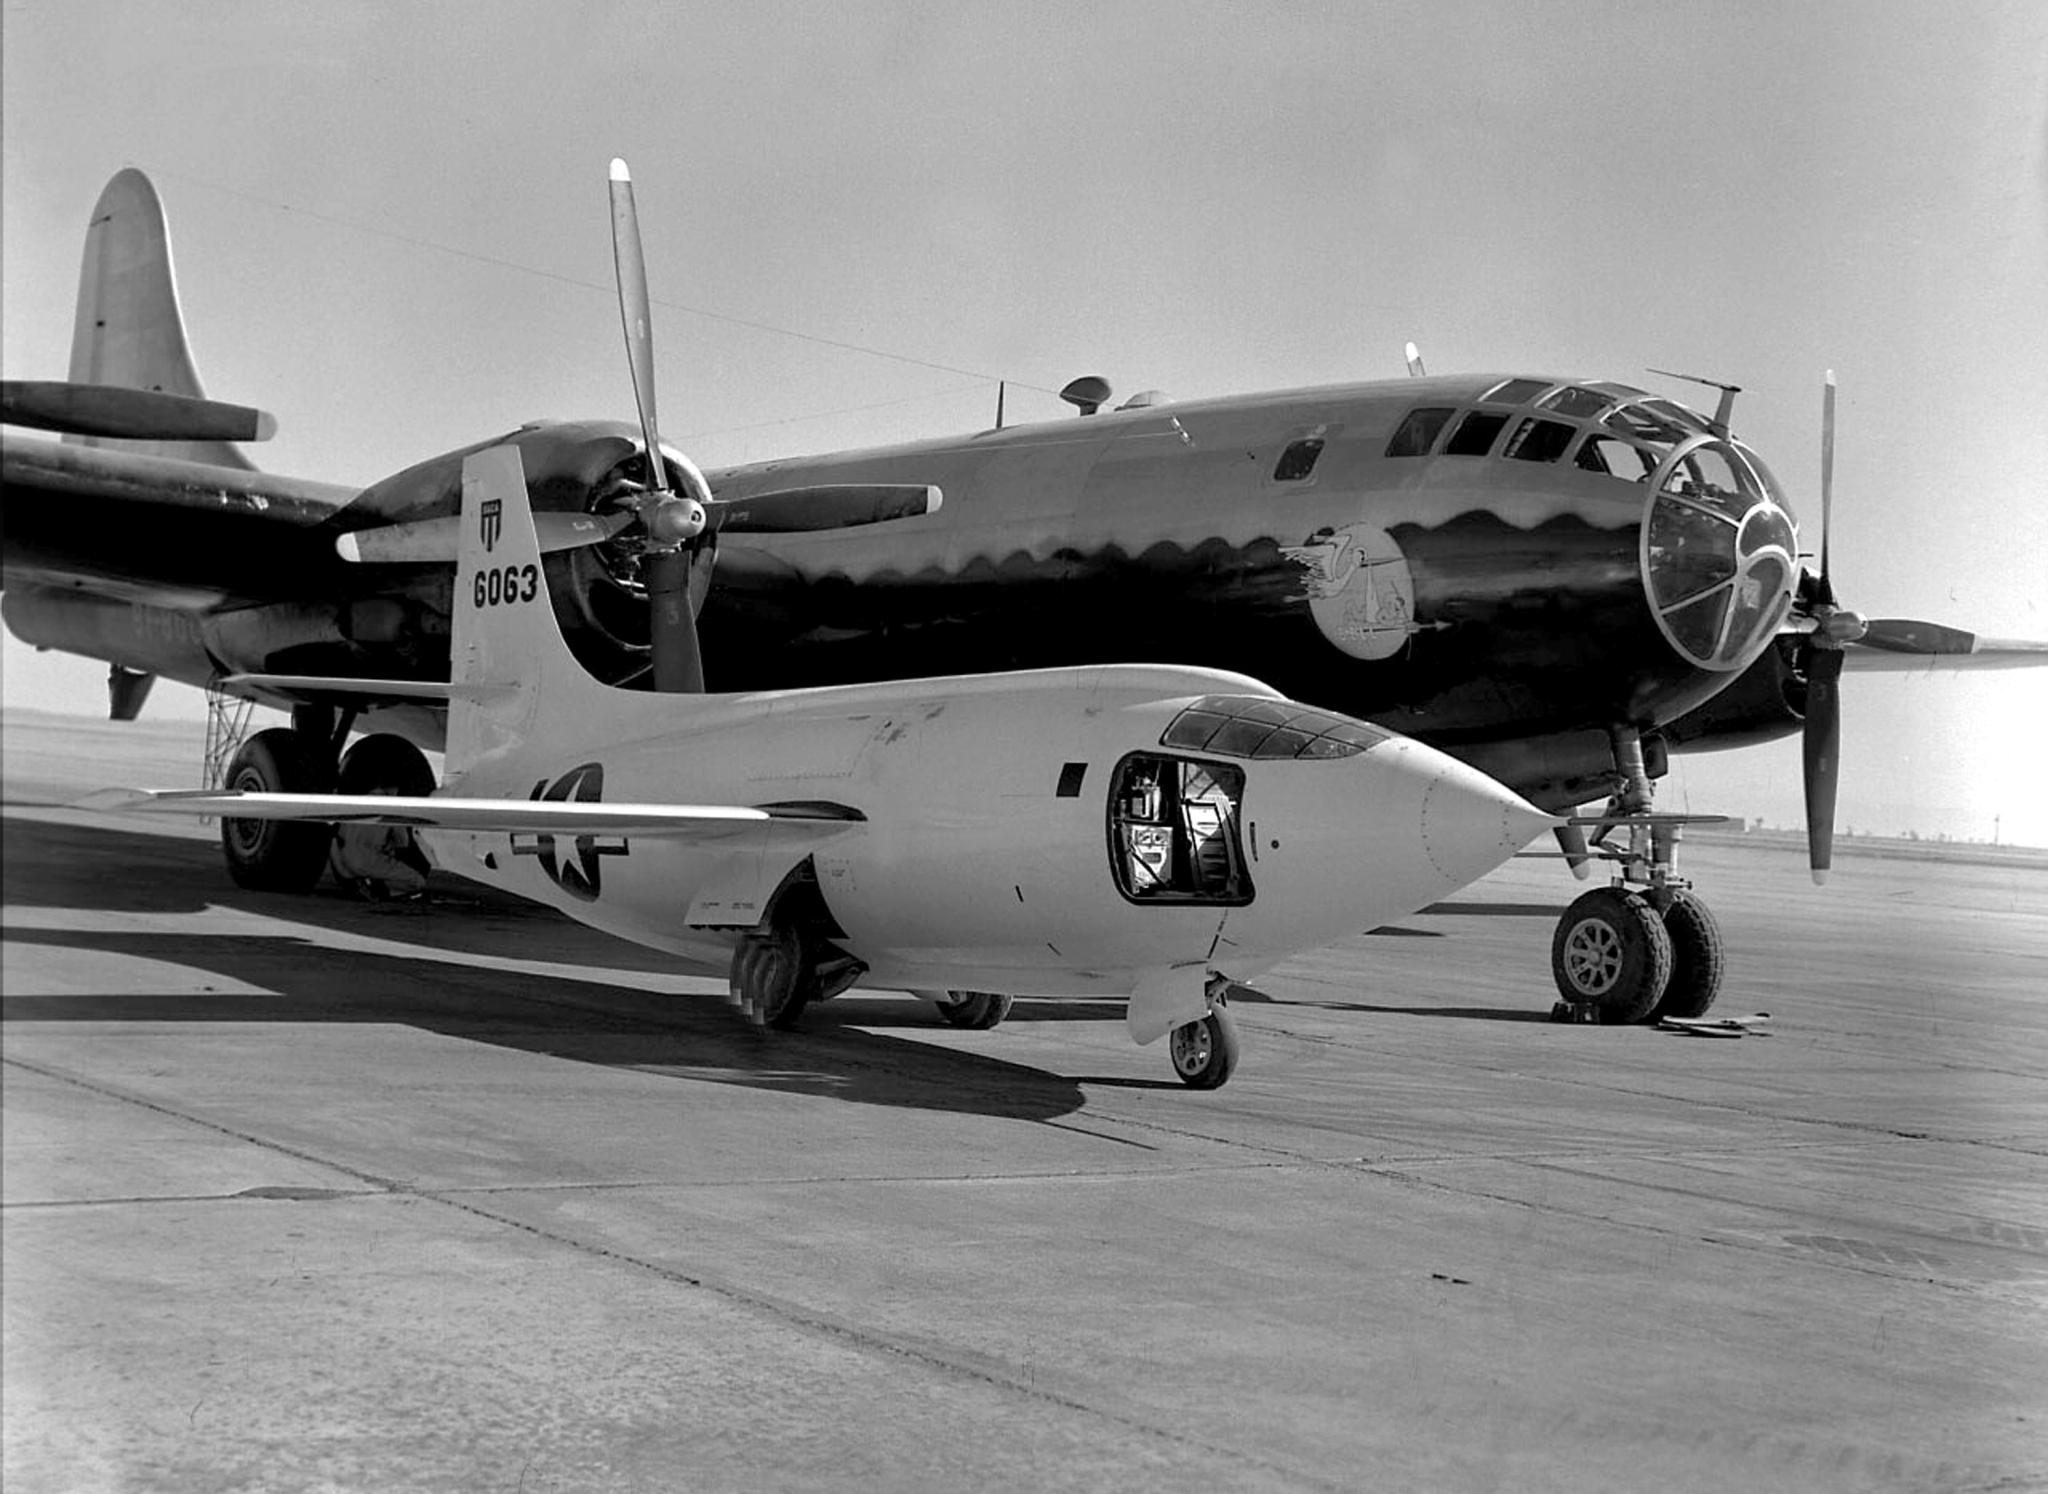 XS-1 sits on the ramp with the B-29 mothership